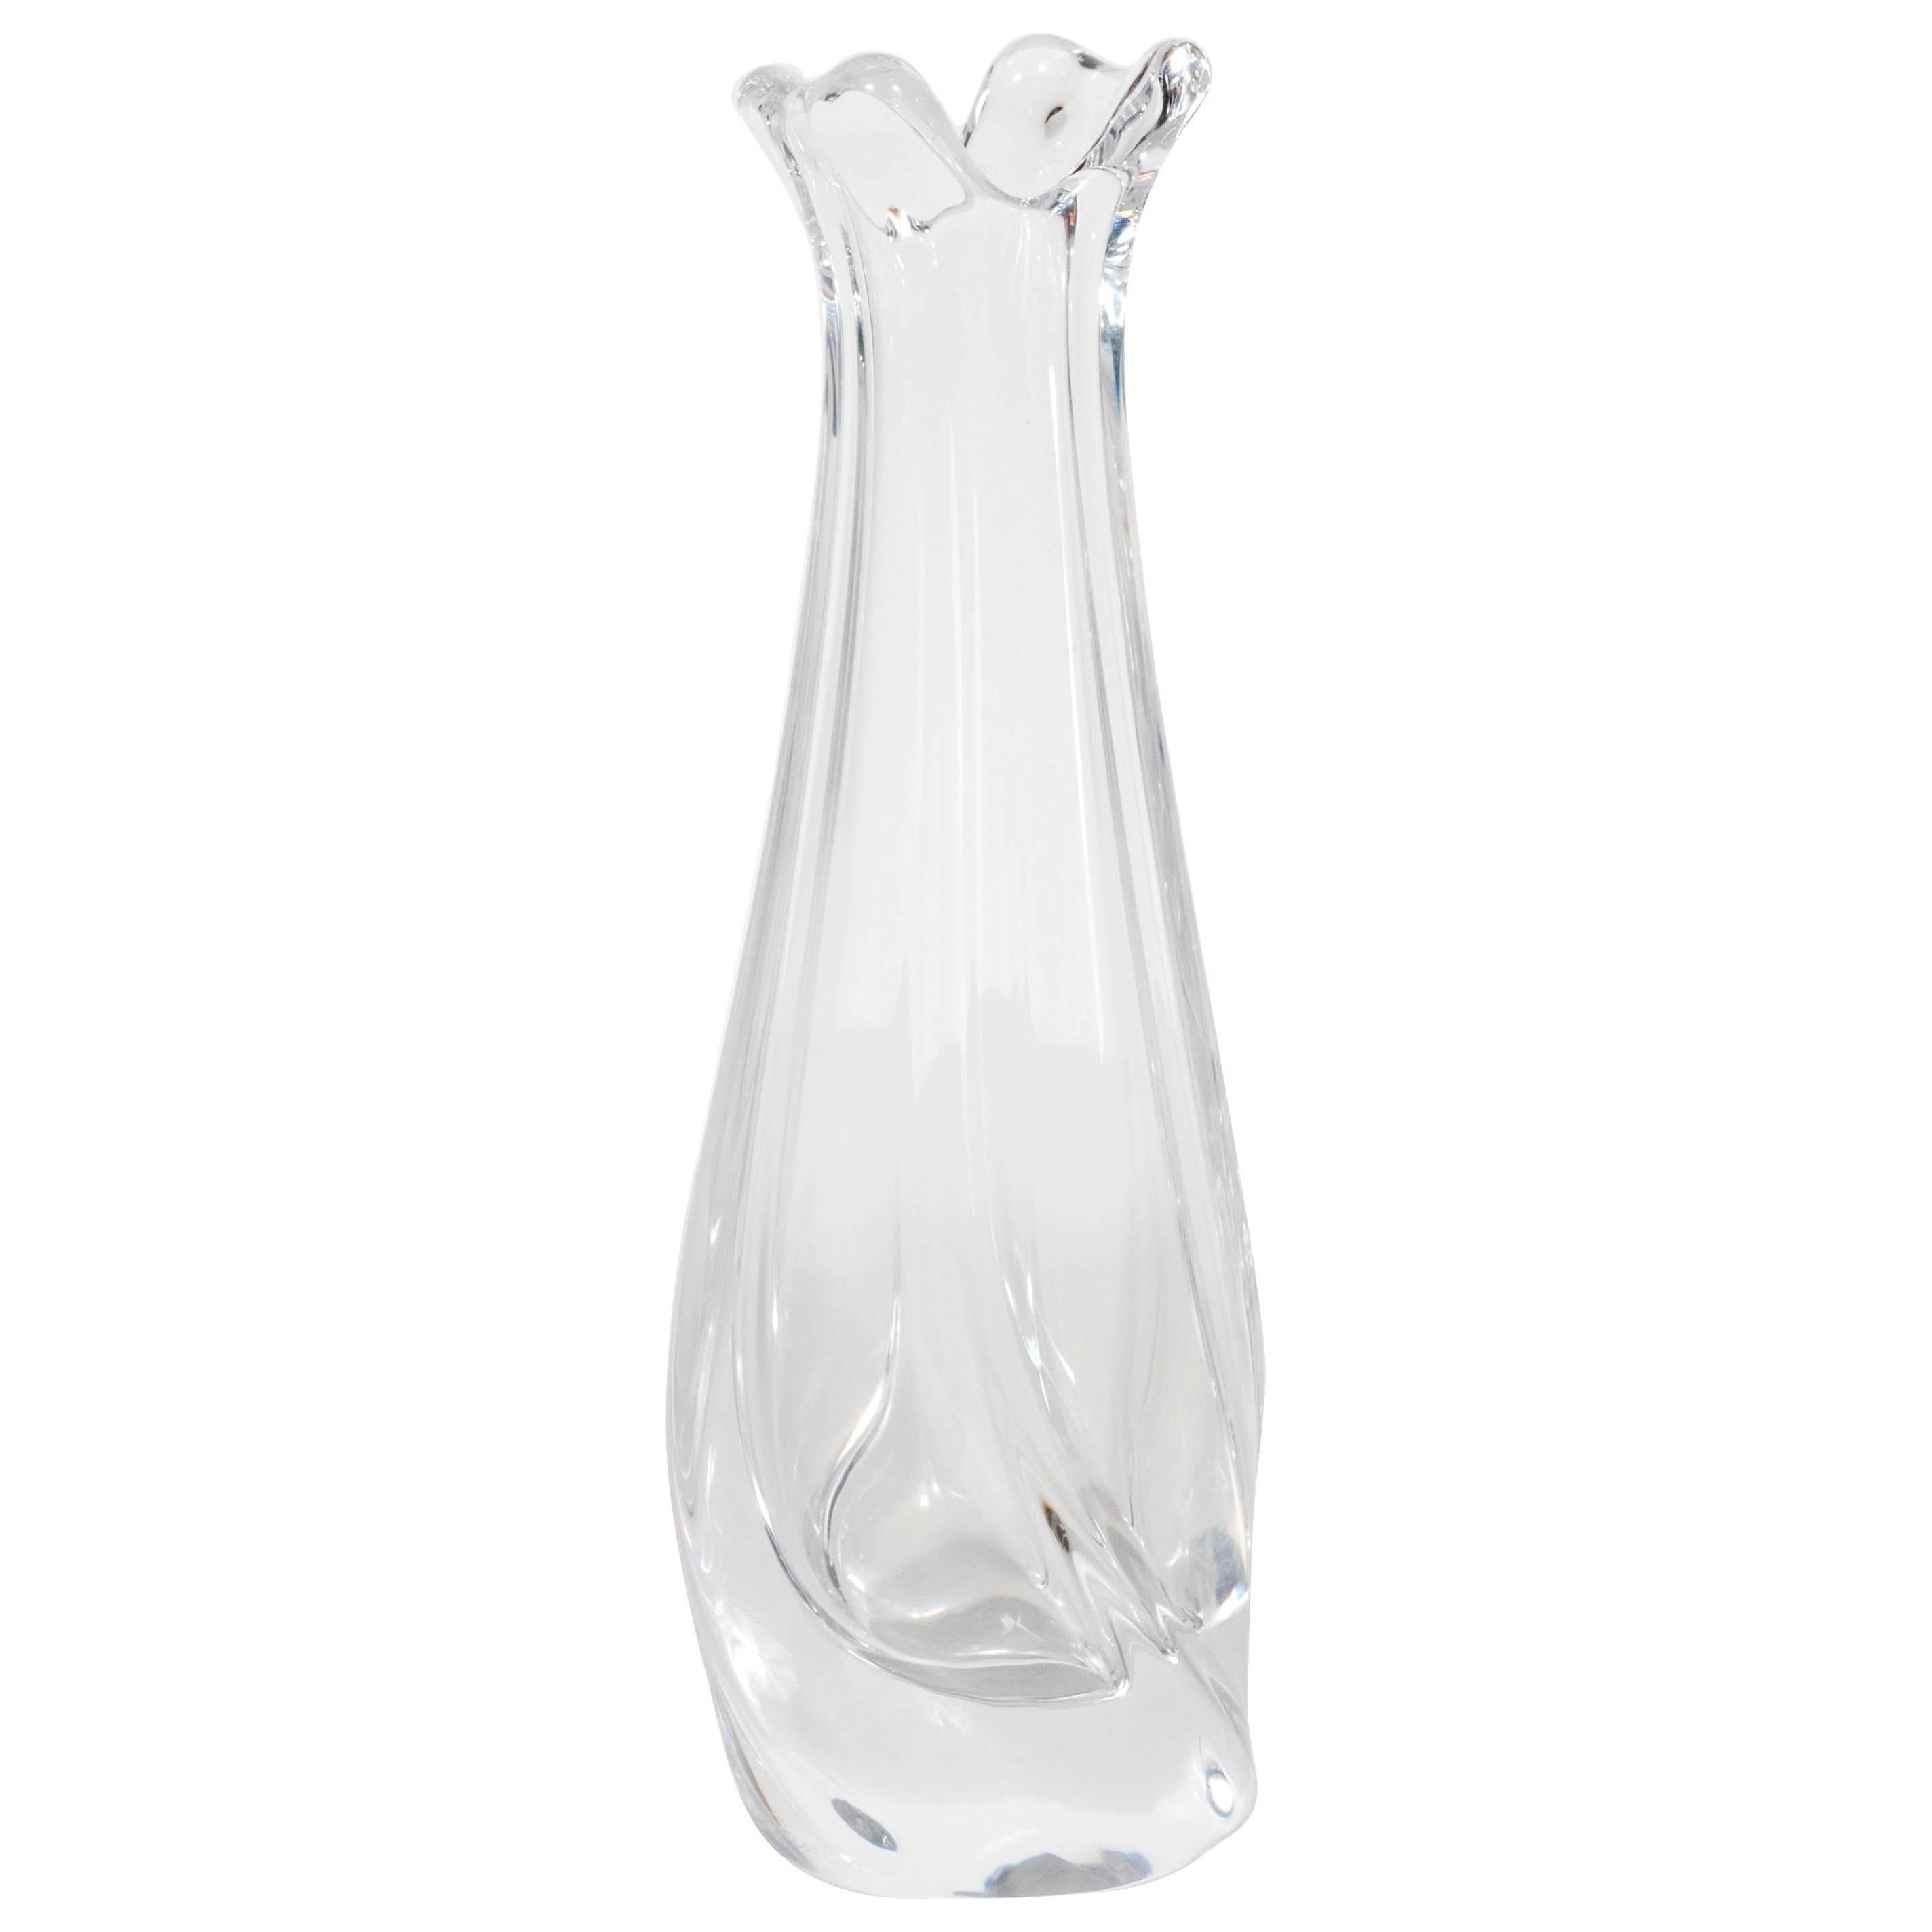 French Mid-Century Modern Translucent Sinuous Glass Vase by Daum France